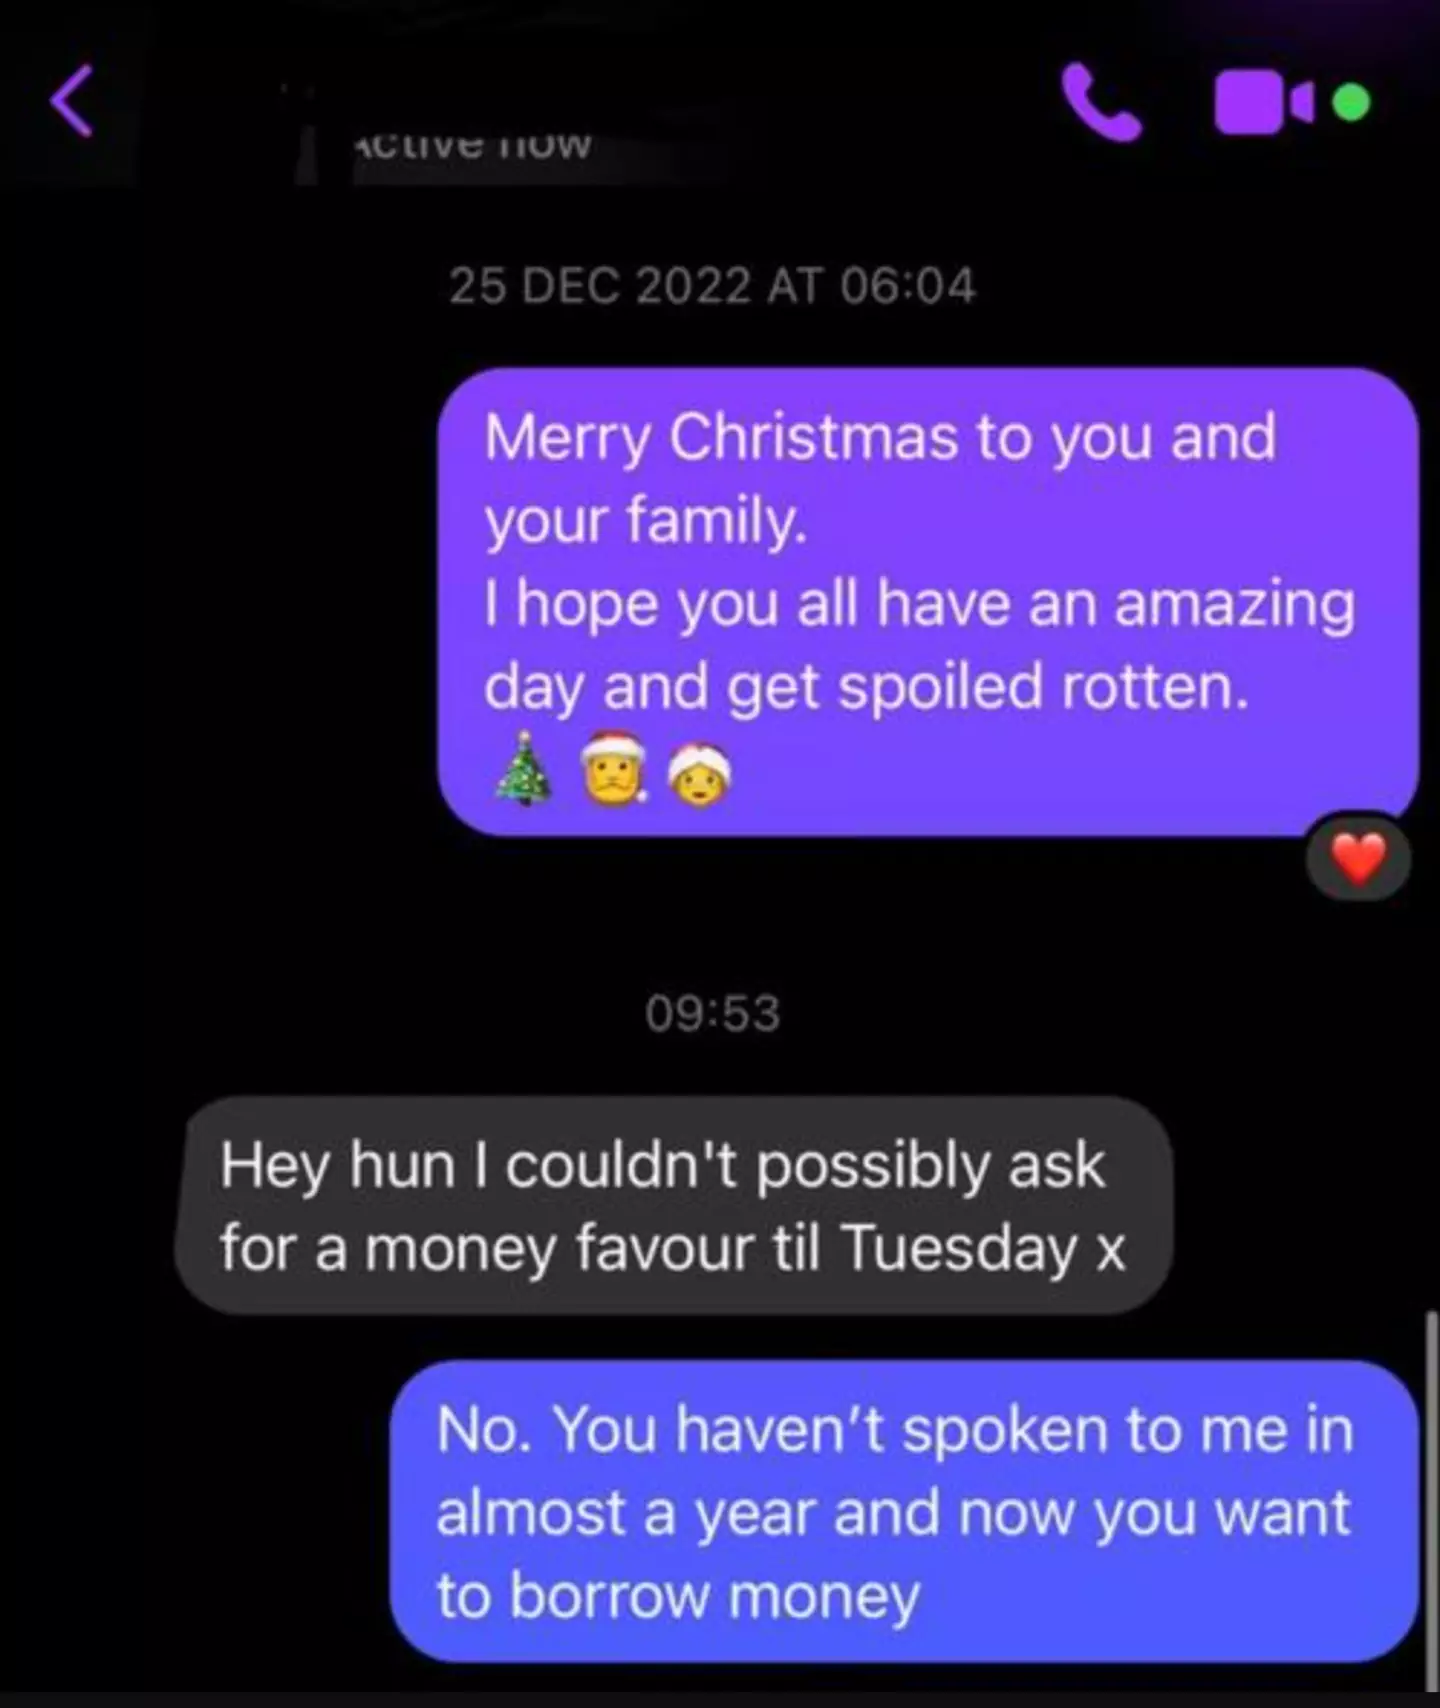 One woman was fuming after her friend asked to borrow money after nearly a year of not talking.